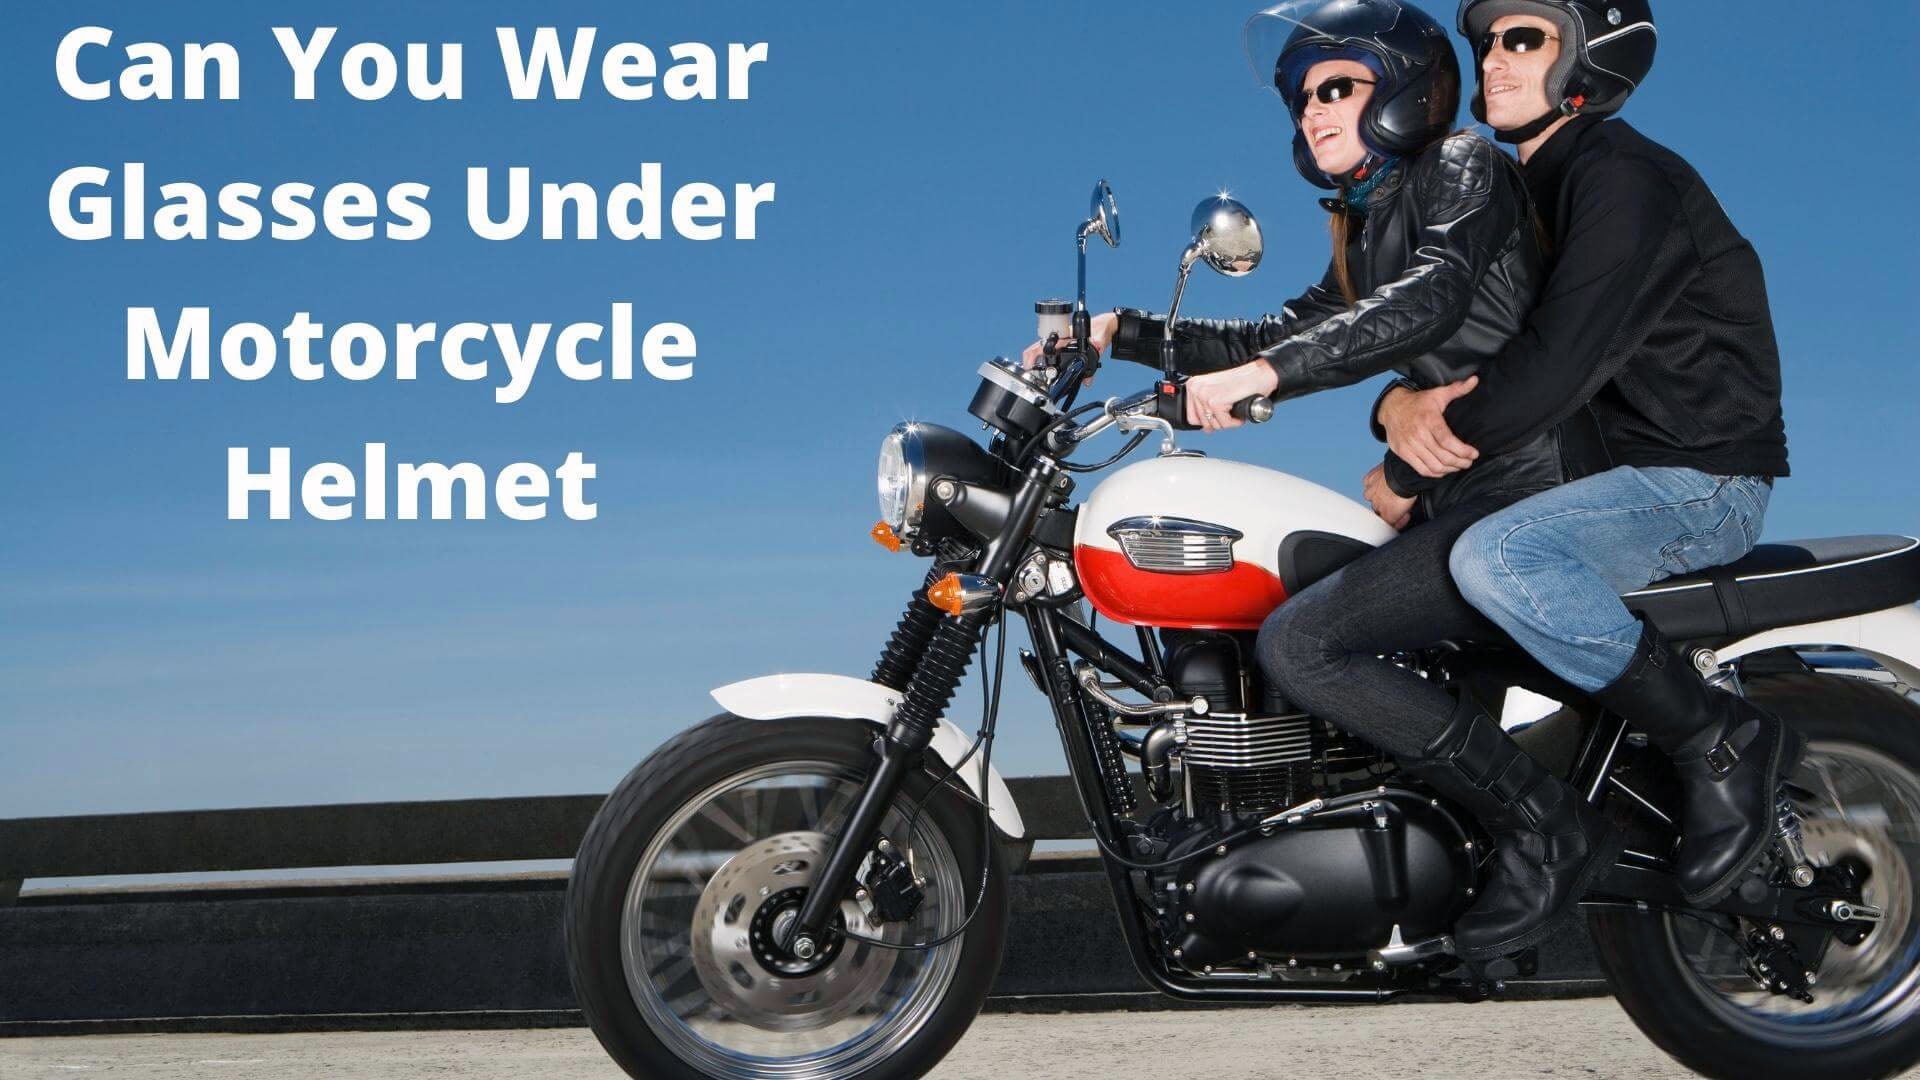 Can You Wear Glasses Under Motorcycle Helmet? Detailed Explained